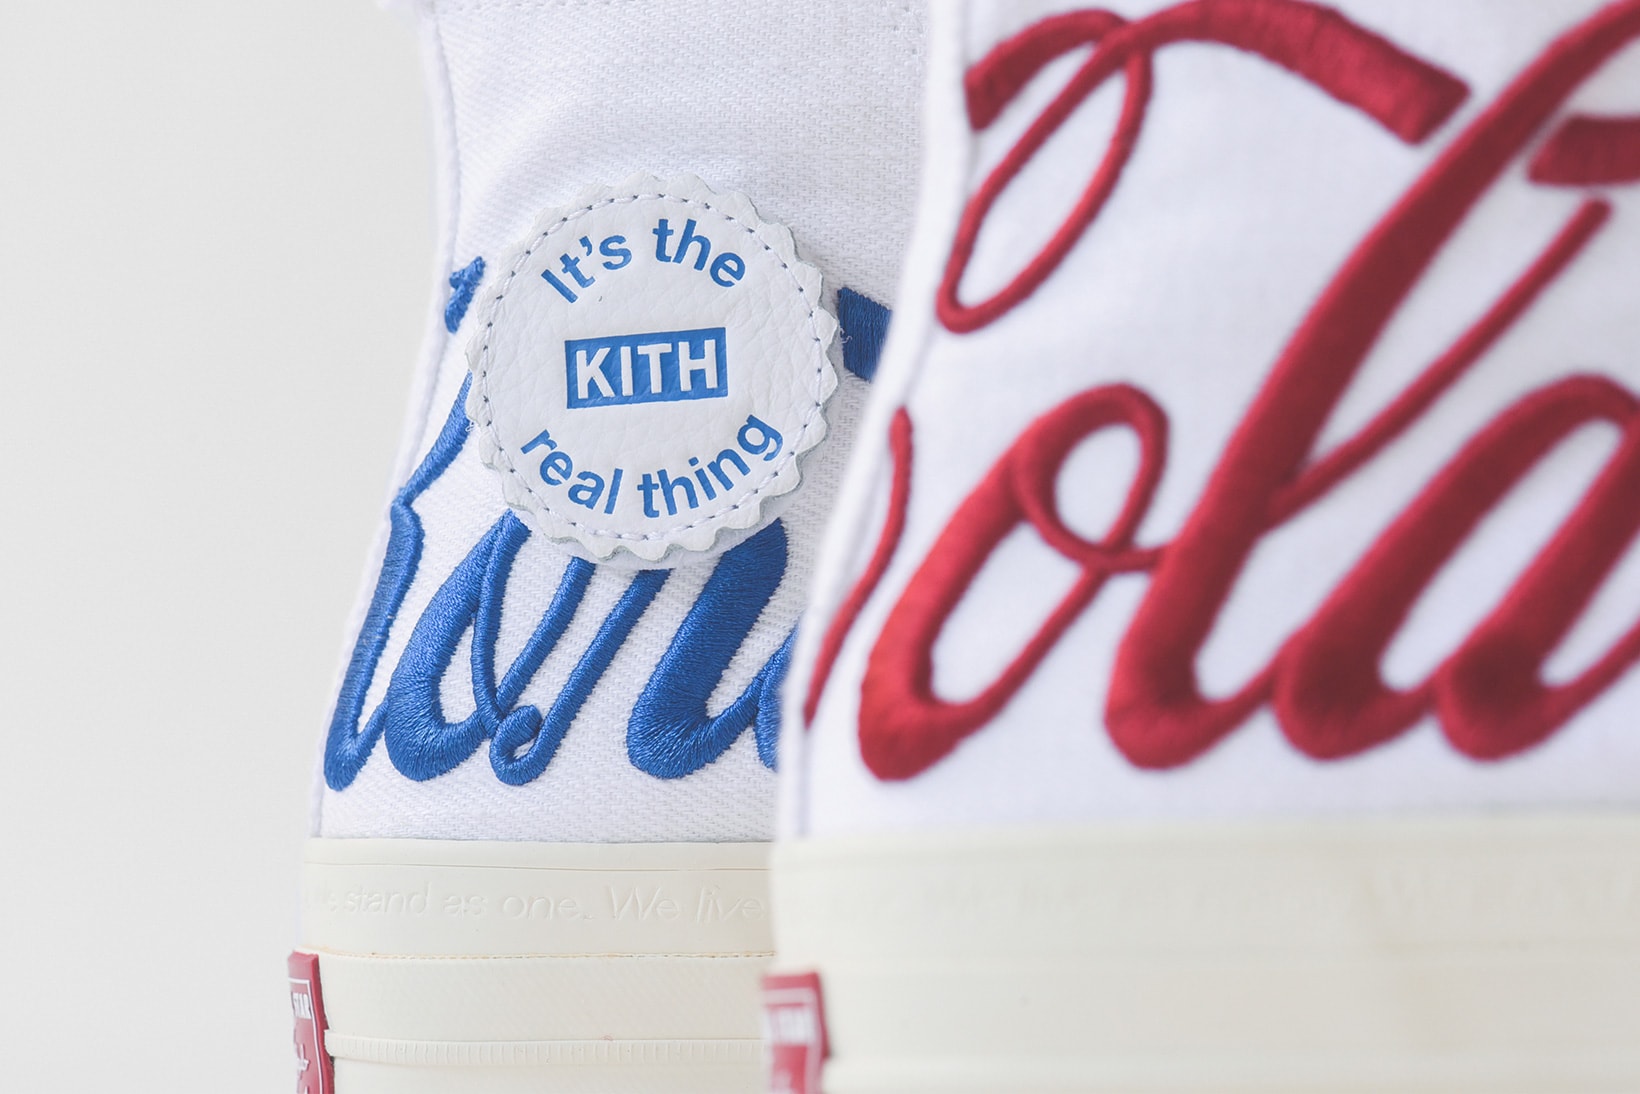 Coca Cola x KITH Summer 2018 Capsule Collection Ronnie Fieg Converse Chuck Taylor 70 Apparel August 18 Release Date Information How to Buy